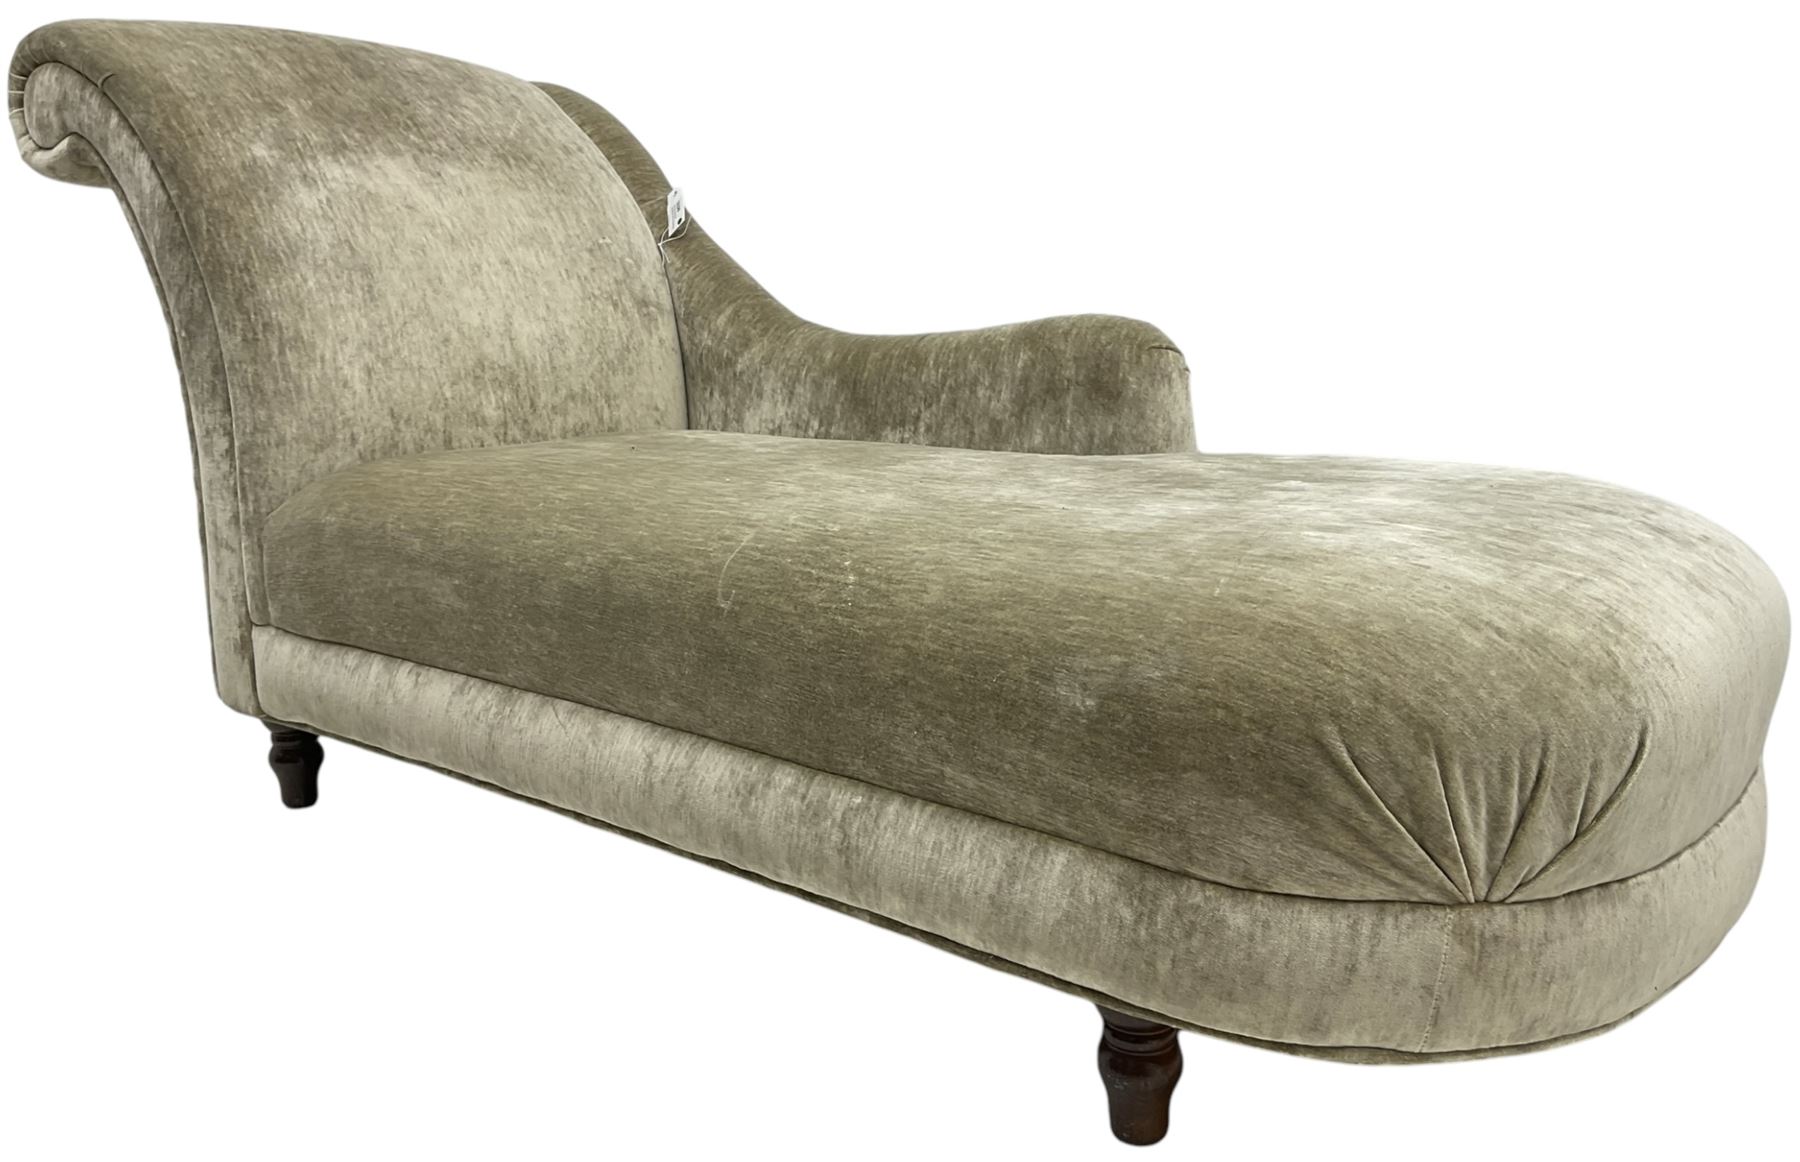 Contemporary chaise longue with scrolled back - Image 5 of 8